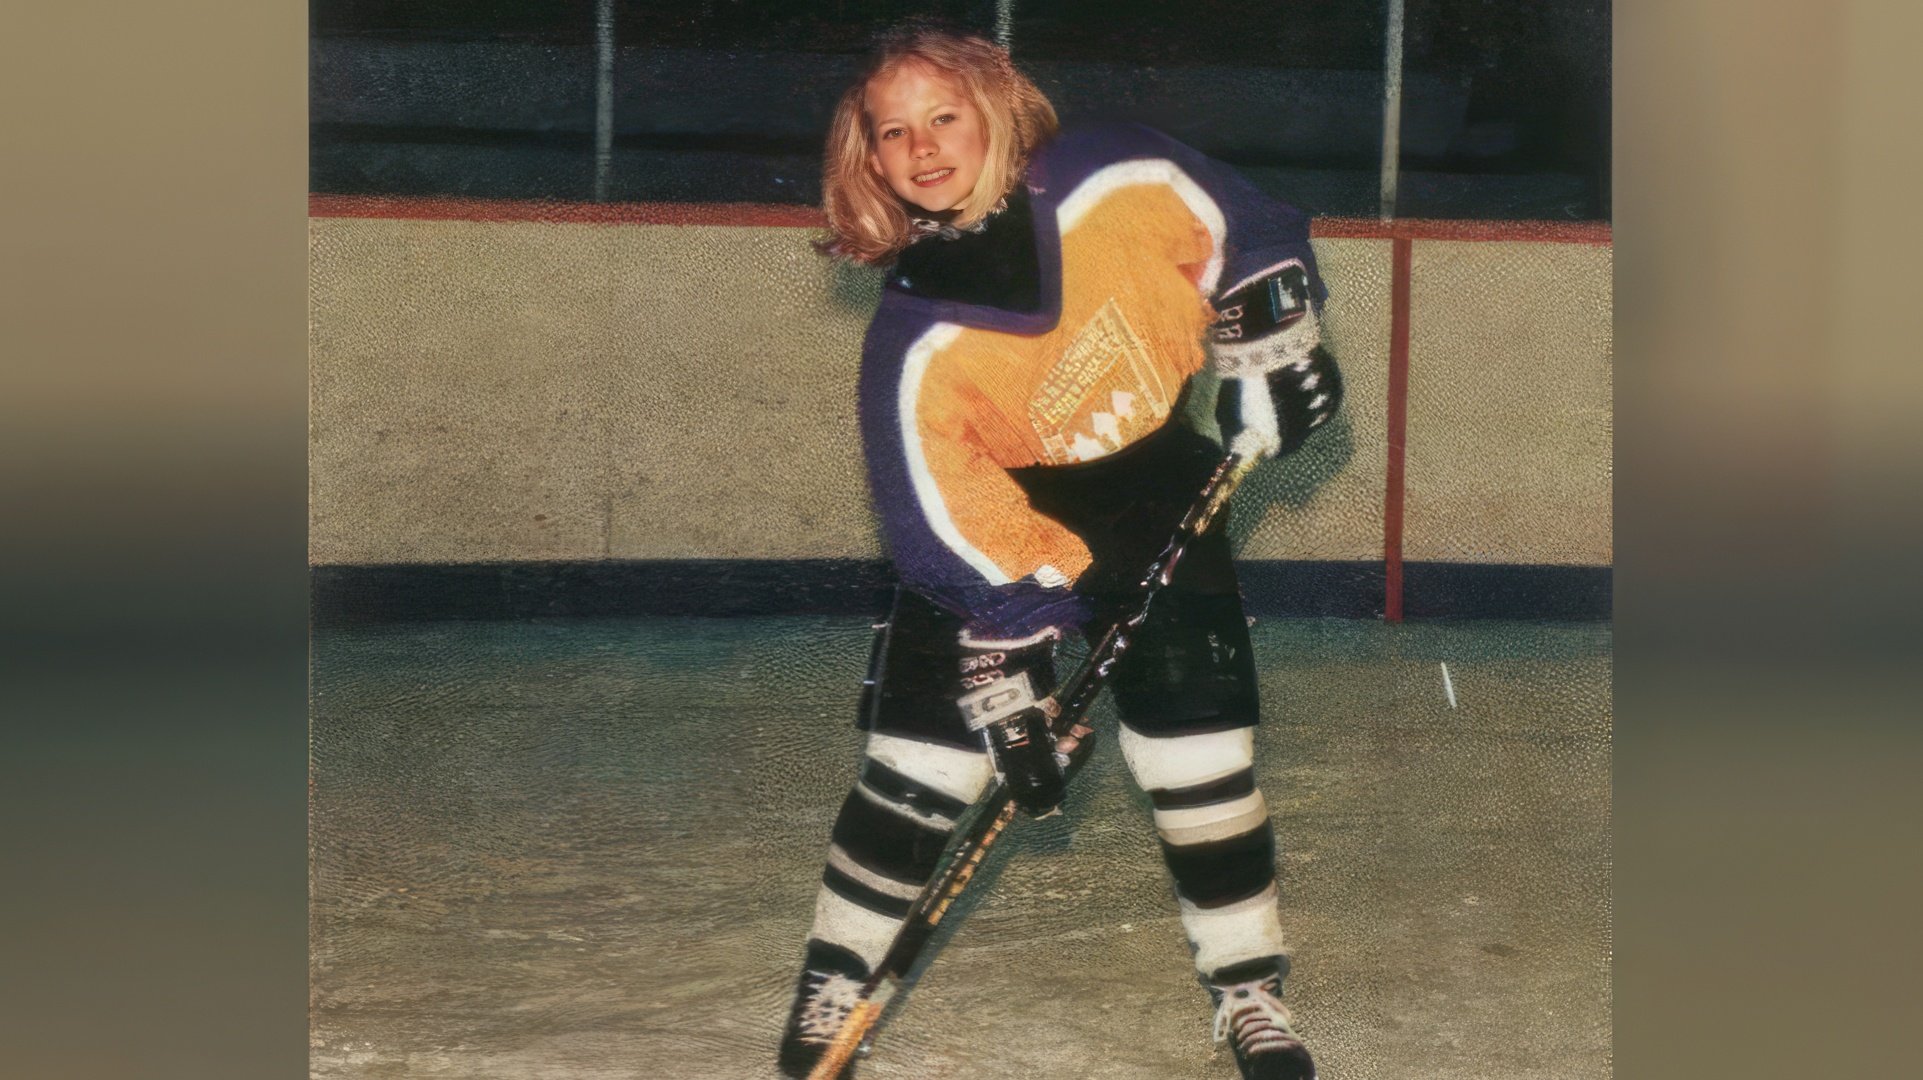 During school, Avril Lavigne played on the hockey team